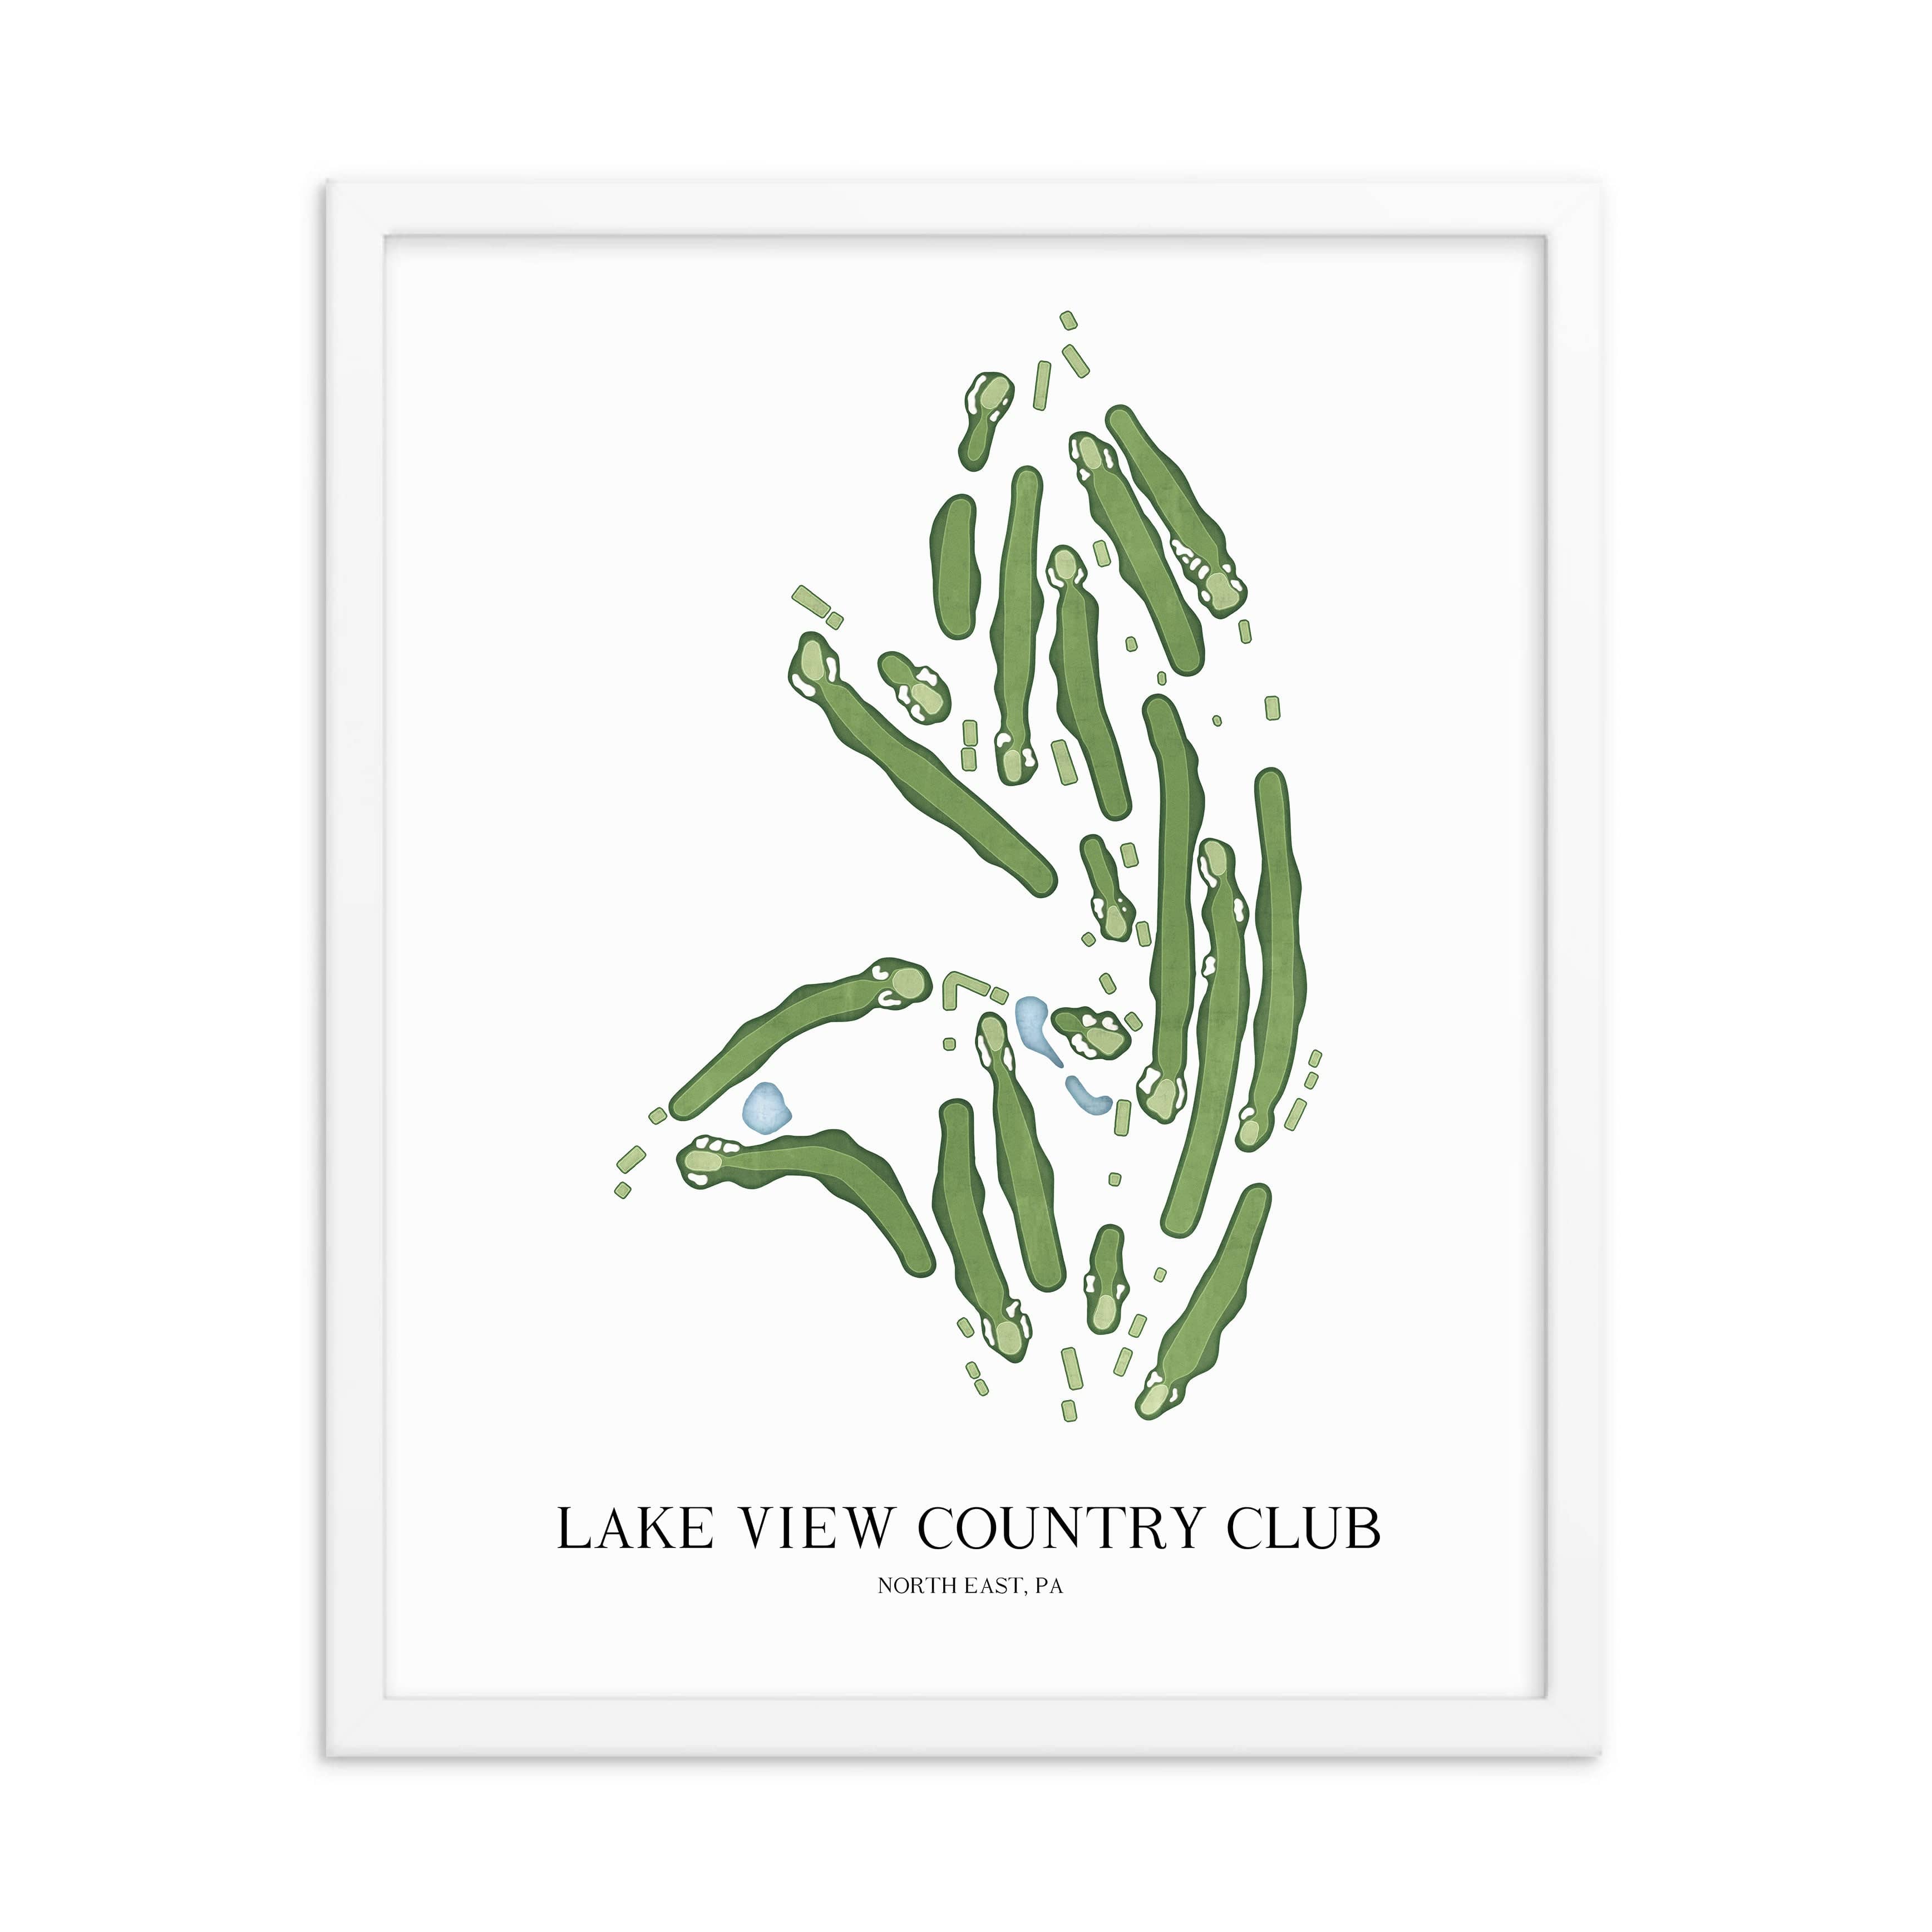 The 19th Hole Golf Shop - Golf Course Prints -  Lake View Country Club Golf Course Map